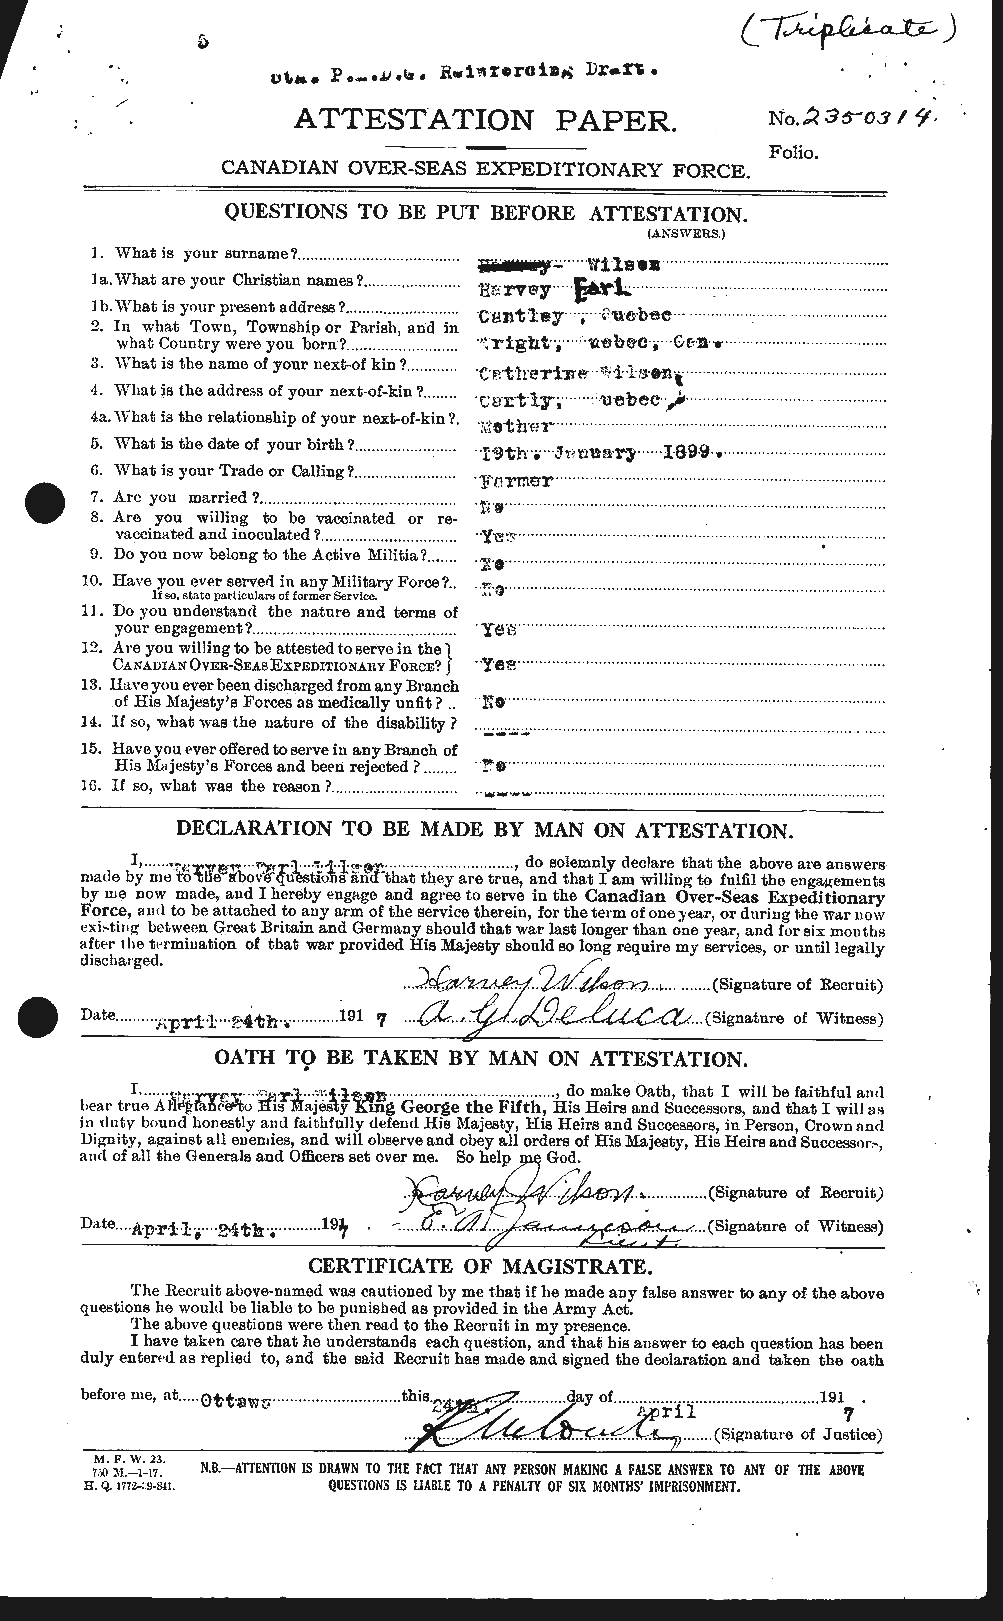 Personnel Records of the First World War - CEF 679481a